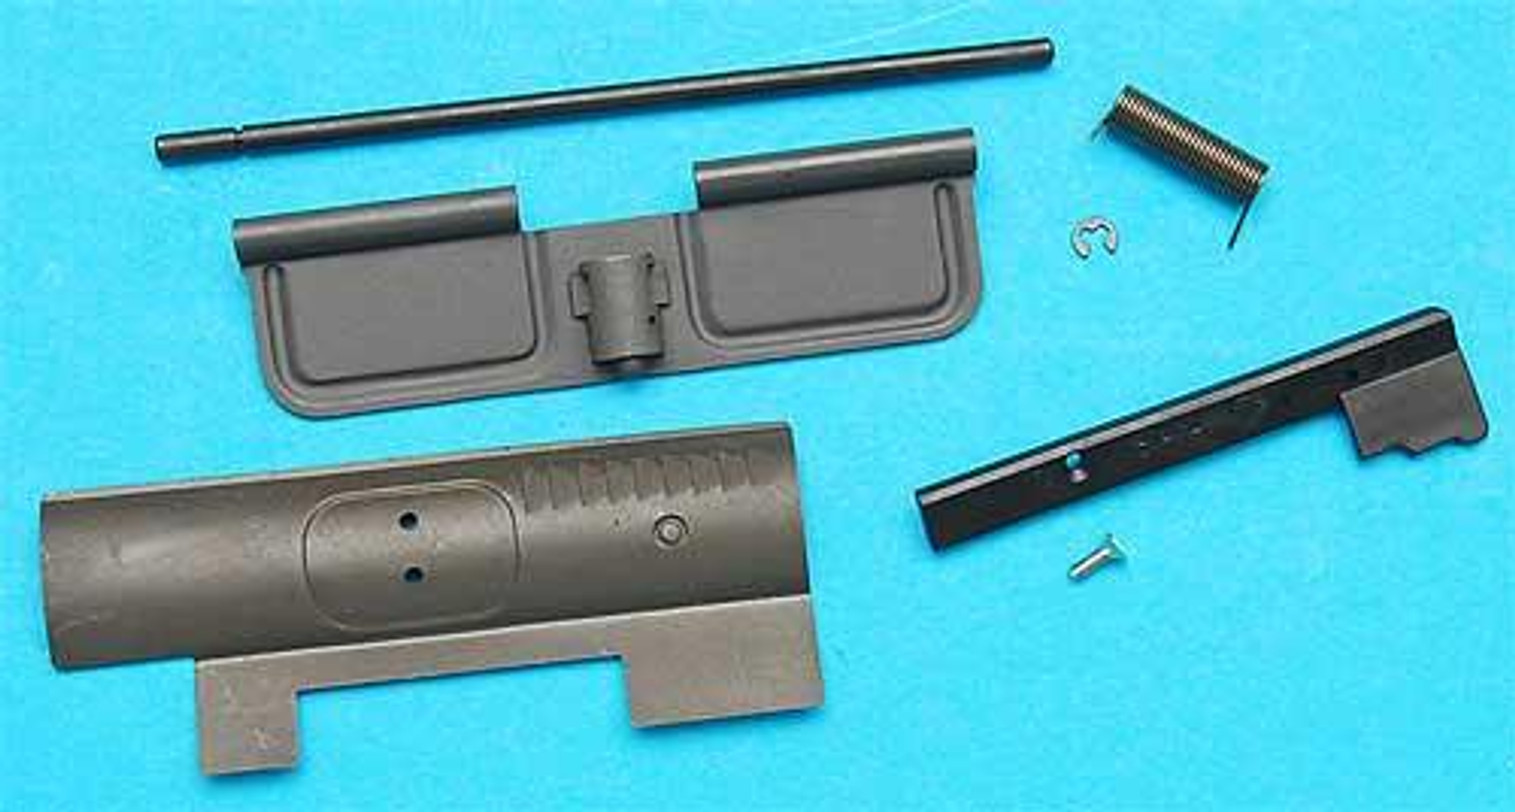 G&P M4 Dust Cover & Bolt Cover Set for Airsoft M4 / M16 Series AEG
